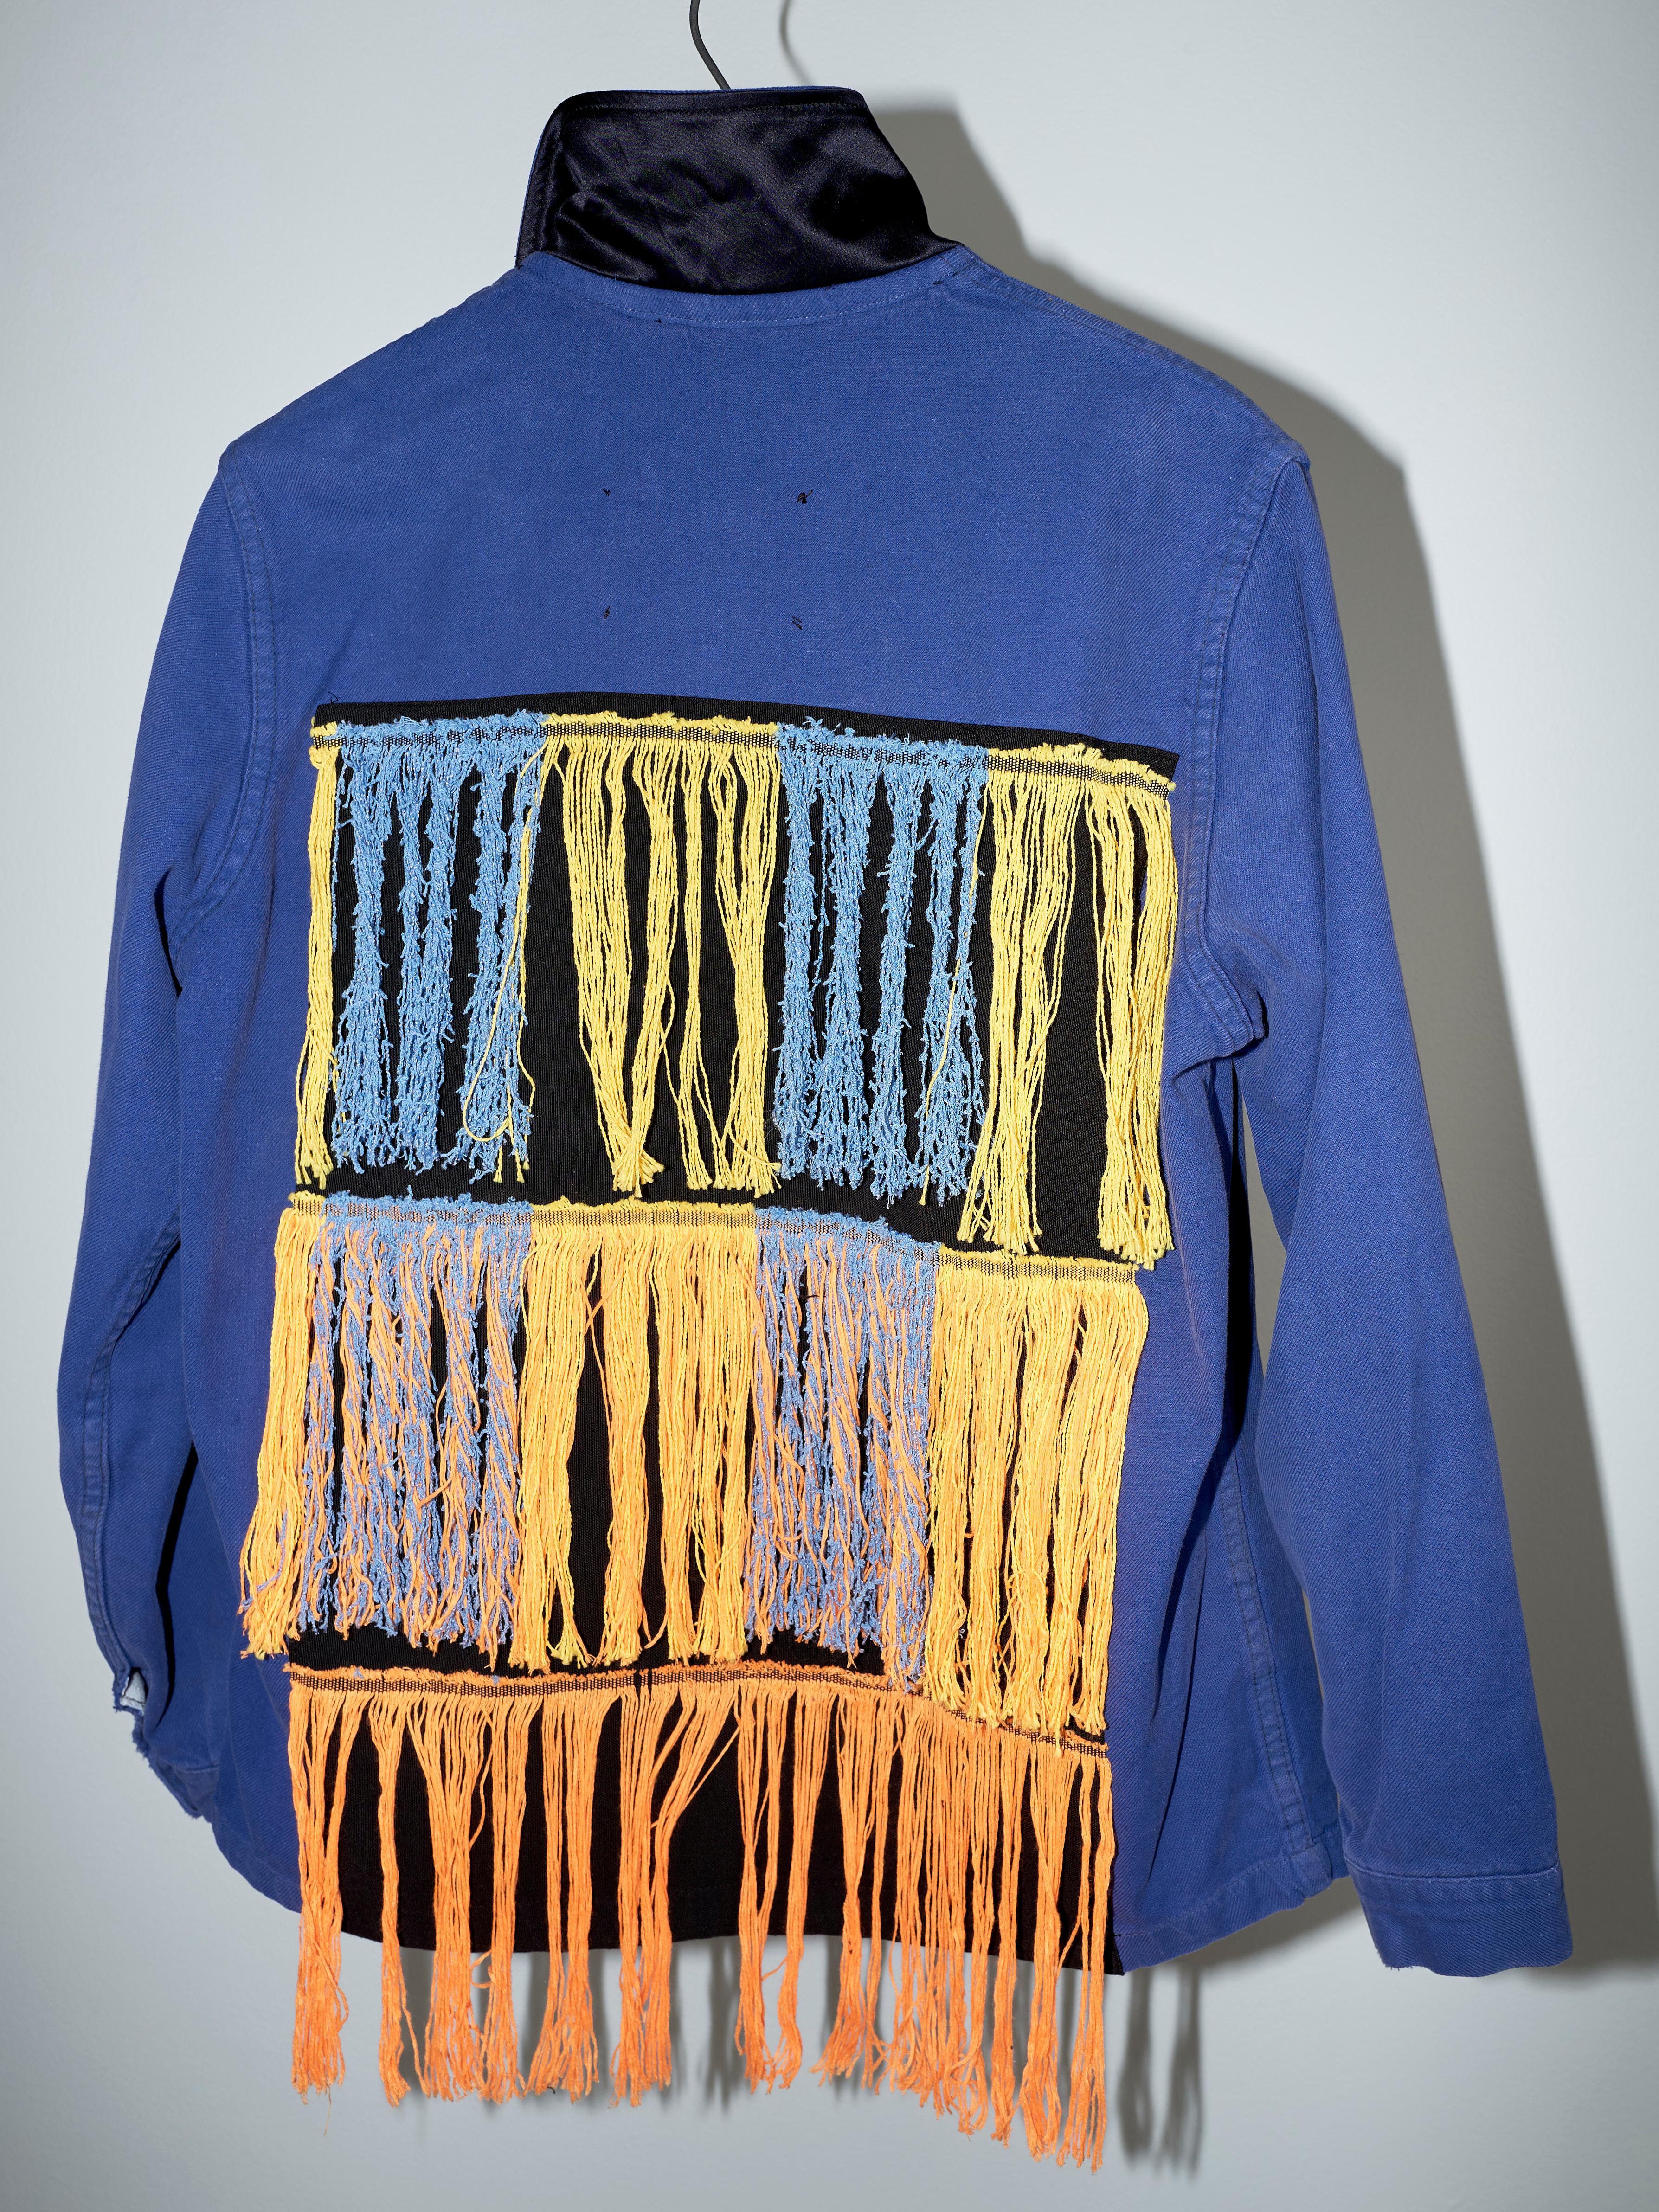 Fringe Yellow Orange Blue Jacket Work France One of a Kind Small For Sale 2